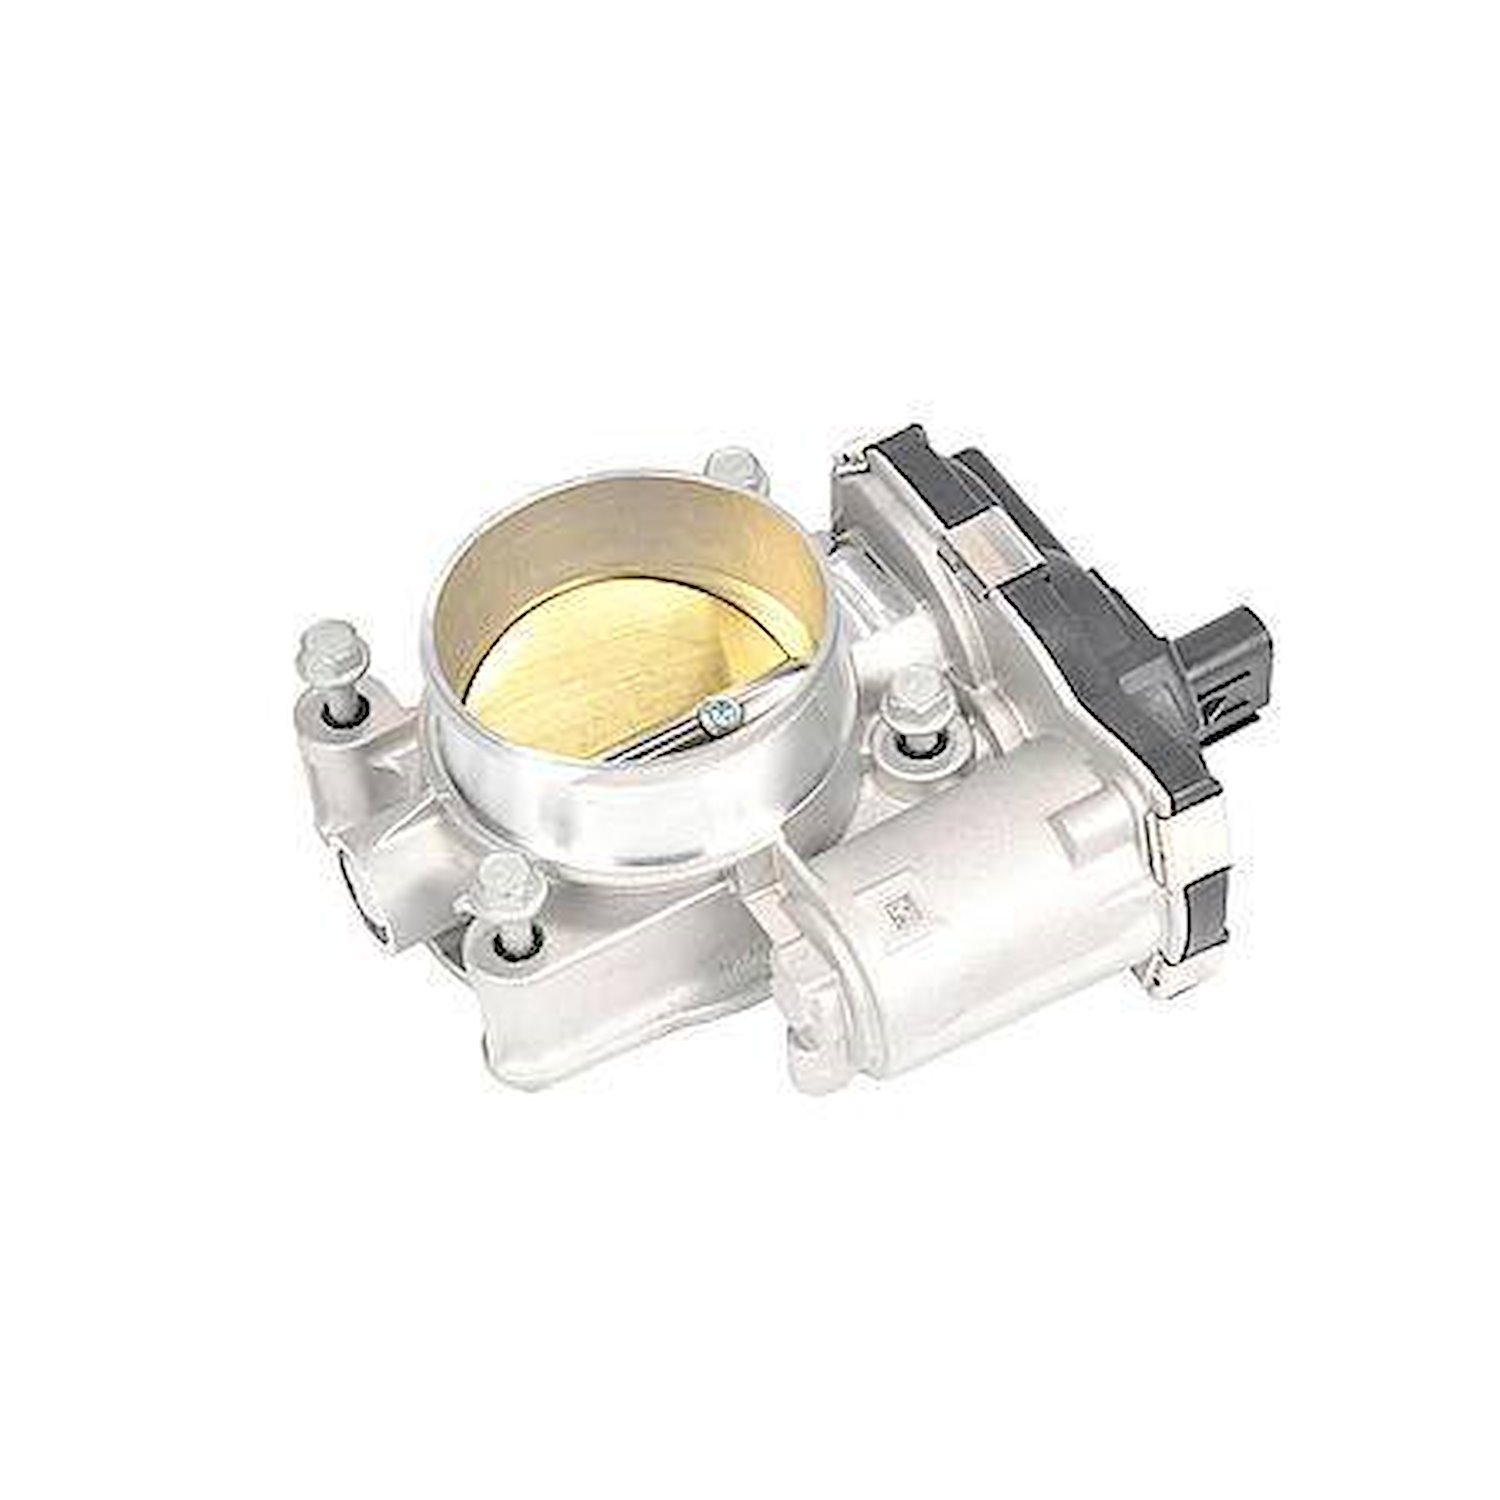 Throttle Body Assembly for Select 2012-2017 Buick, Chevrolet, GMC